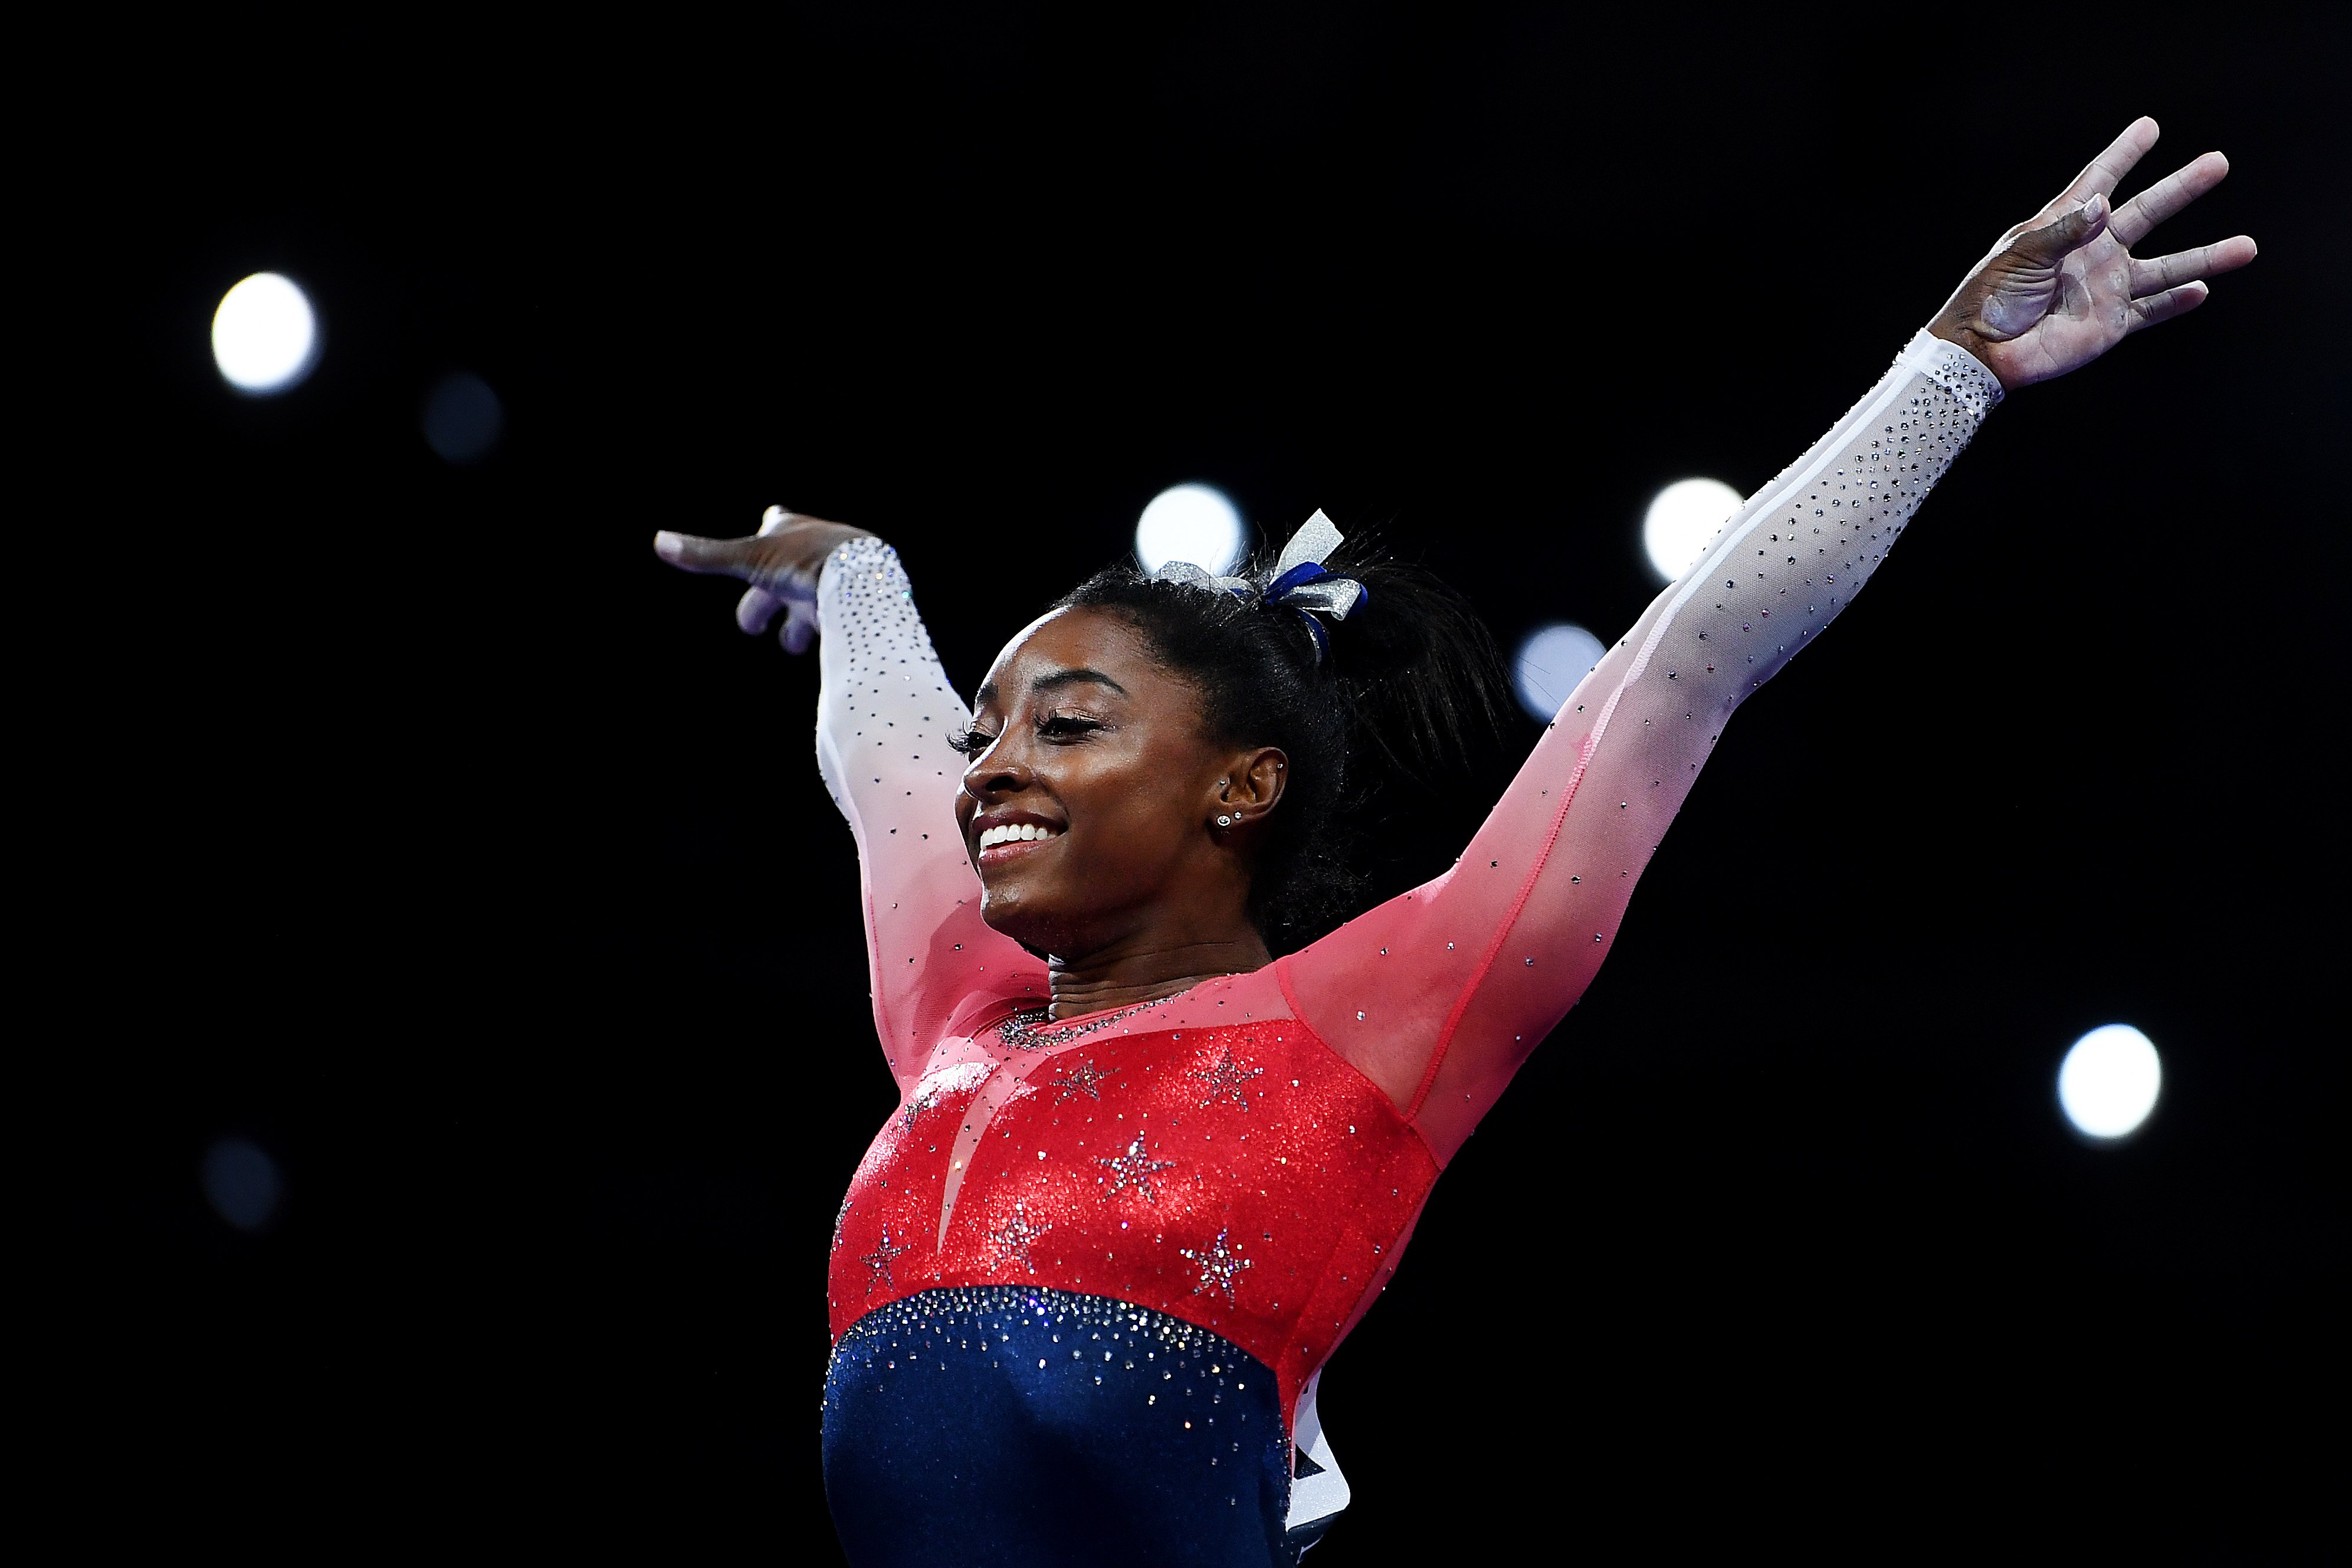 Simone Biles at the FIG Artistic Gymnastics World Championships on October 08, 2019. | Photo: Getty Images